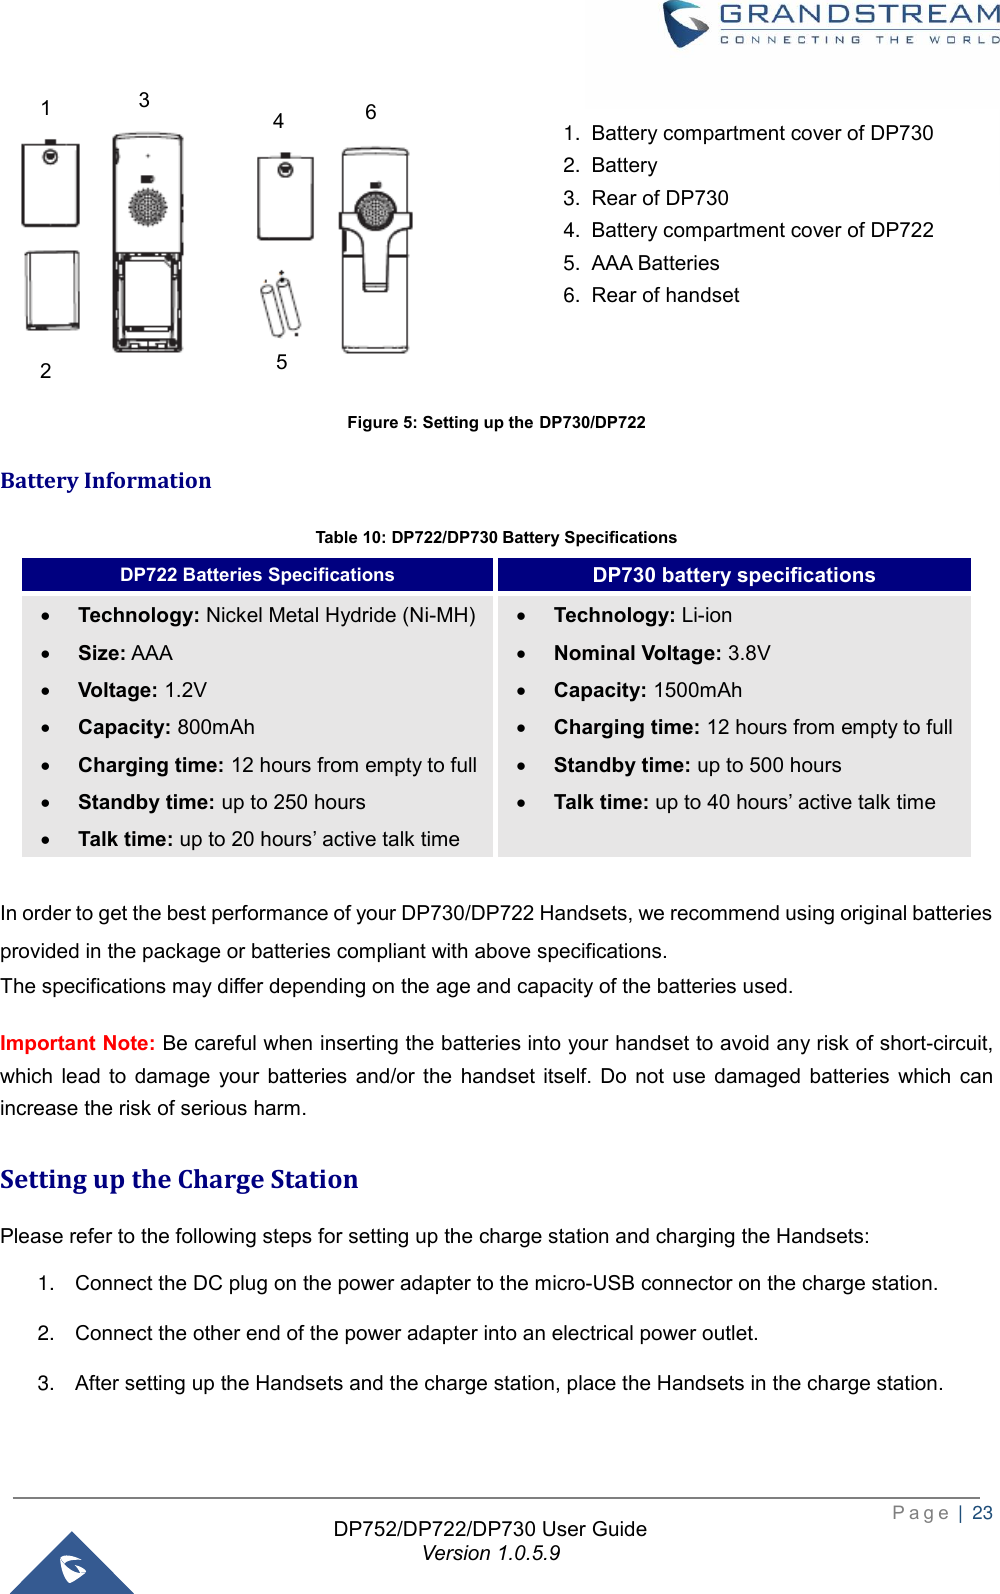  P a g e  |  23   DP752/DP722/DP730 User Guide Version 1.0.5.9             Figure 5: Setting up the DP730/DP722 Battery Information   Table 10: DP722/DP730 Battery Specifications  In order to get the best performance of your DP730/DP722 Handsets, we recommend using original batteries provided in the package or batteries compliant with above specifications. The specifications may differ depending on the age and capacity of the batteries used. Important Note: Be careful when inserting the batteries into your handset to avoid any risk of short-circuit, which  lead  to  damage  your  batteries  and/or  the  handset  itself.  Do  not  use  damaged  batteries  which  can increase the risk of serious harm. Setting up the Charge Station   Please refer to the following steps for setting up the charge station and charging the Handsets: 1. Connect the DC plug on the power adapter to the micro-USB connector on the charge station. 2. Connect the other end of the power adapter into an electrical power outlet. 3. After setting up the Handsets and the charge station, place the Handsets in the charge station.  DP722 Batteries Specifications DP730 battery specifications • Technology: Nickel Metal Hydride (Ni-MH)   • Size: AAA   • Voltage: 1.2V   • Capacity: 800mAh • Charging time: 12 hours from empty to full • Standby time: up to 250 hours • Talk time: up to 20 hours’ active talk time • Technology: Li-ion   • Nominal Voltage: 3.8V   • Capacity: 1500mAh • Charging time: 12 hours from empty to full • Standby time: up to 500 hours • Talk time: up to 40 hours’ active talk time 4 2 6 1. Battery compartment cover of DP730 2.Battery 3.Rear of DP730 4.Battery compartment cover of DP722 5.AAA Batteries 6.Rear of handset  5 1 3 